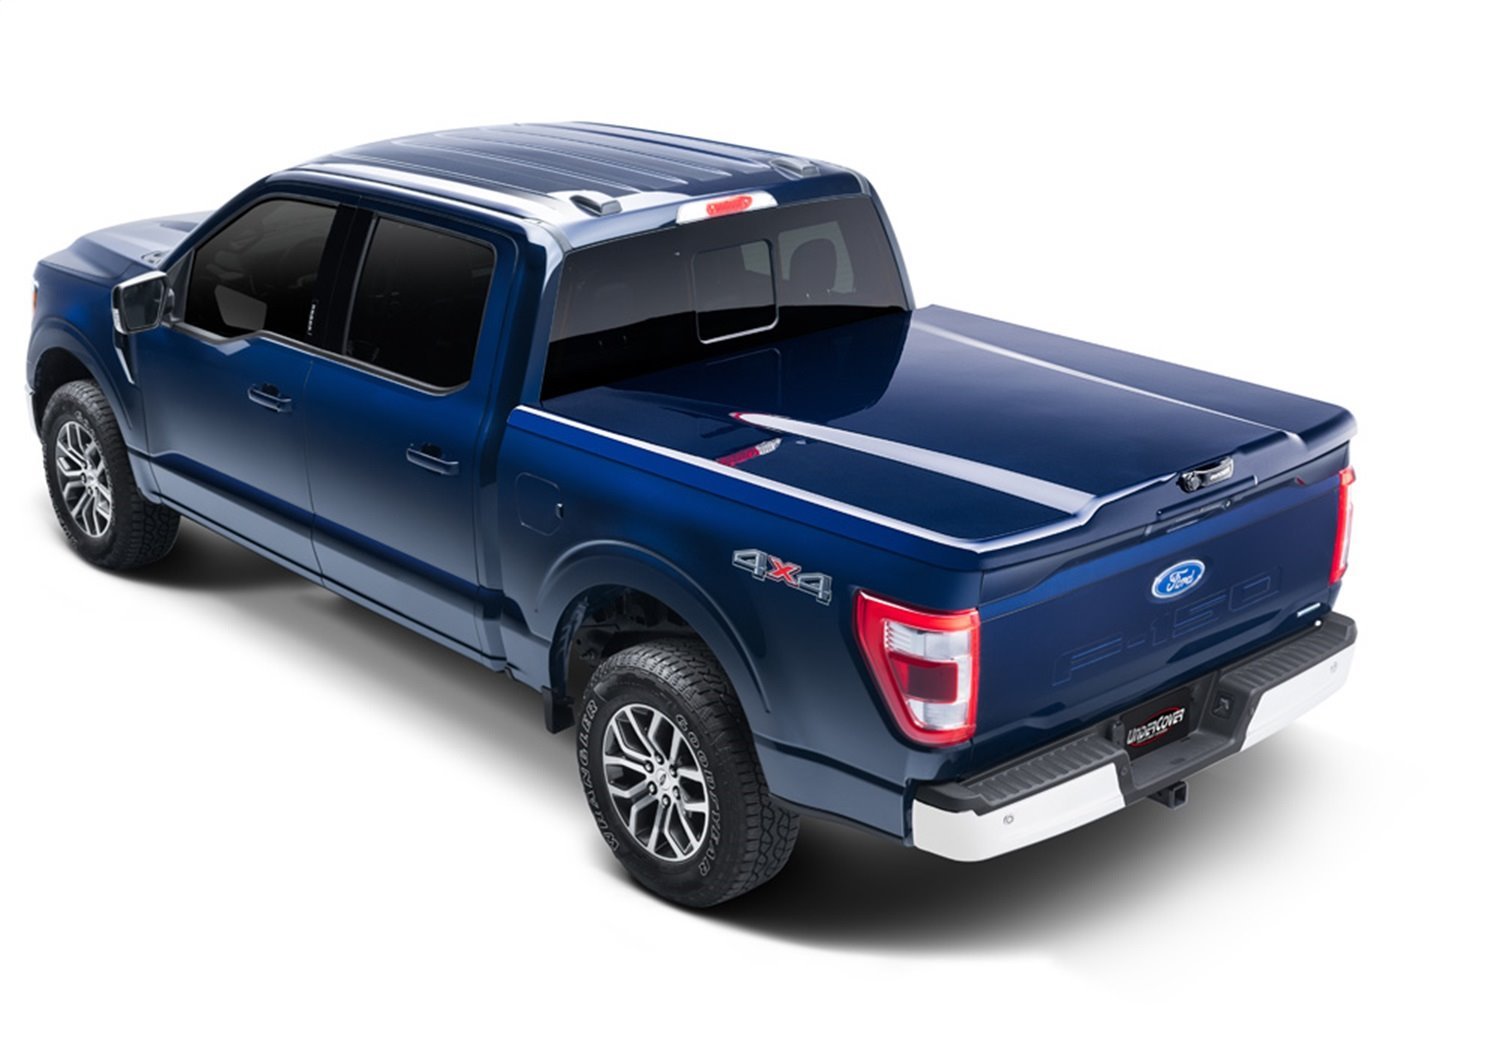 UC2218L-D4 Elite LX Hard Non-Folding Cover, Fits Select Ford F-150 6'7" Bed Crew, D4 Lucid Red Pearl